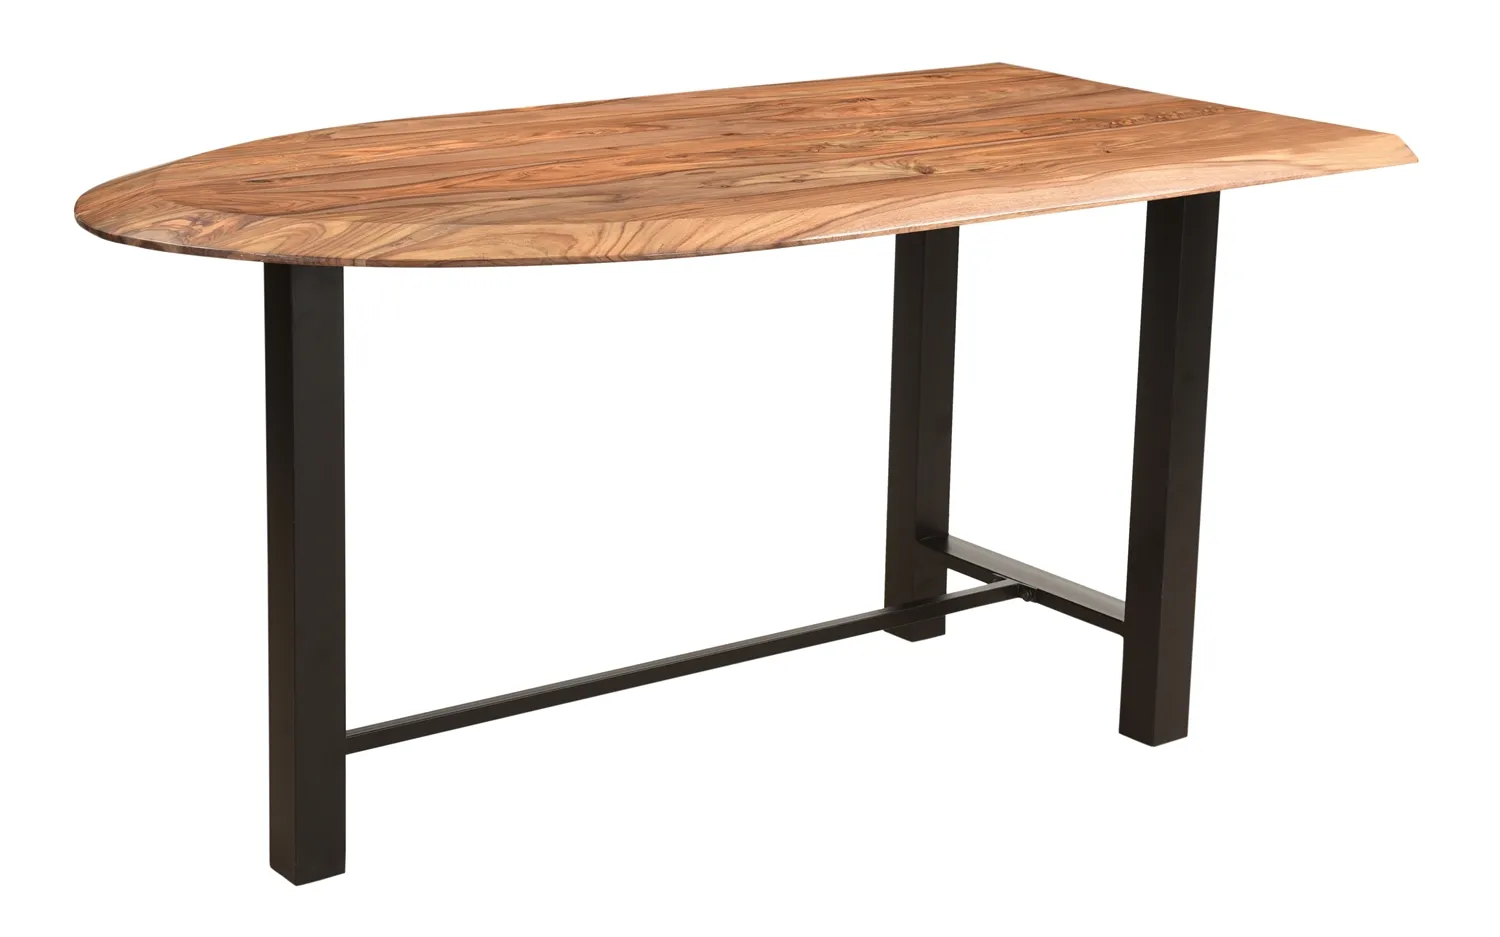 DALE INDUSTRIAL STYLE SOLID WOOD COUNTER HEIGHT DINING TABLE.